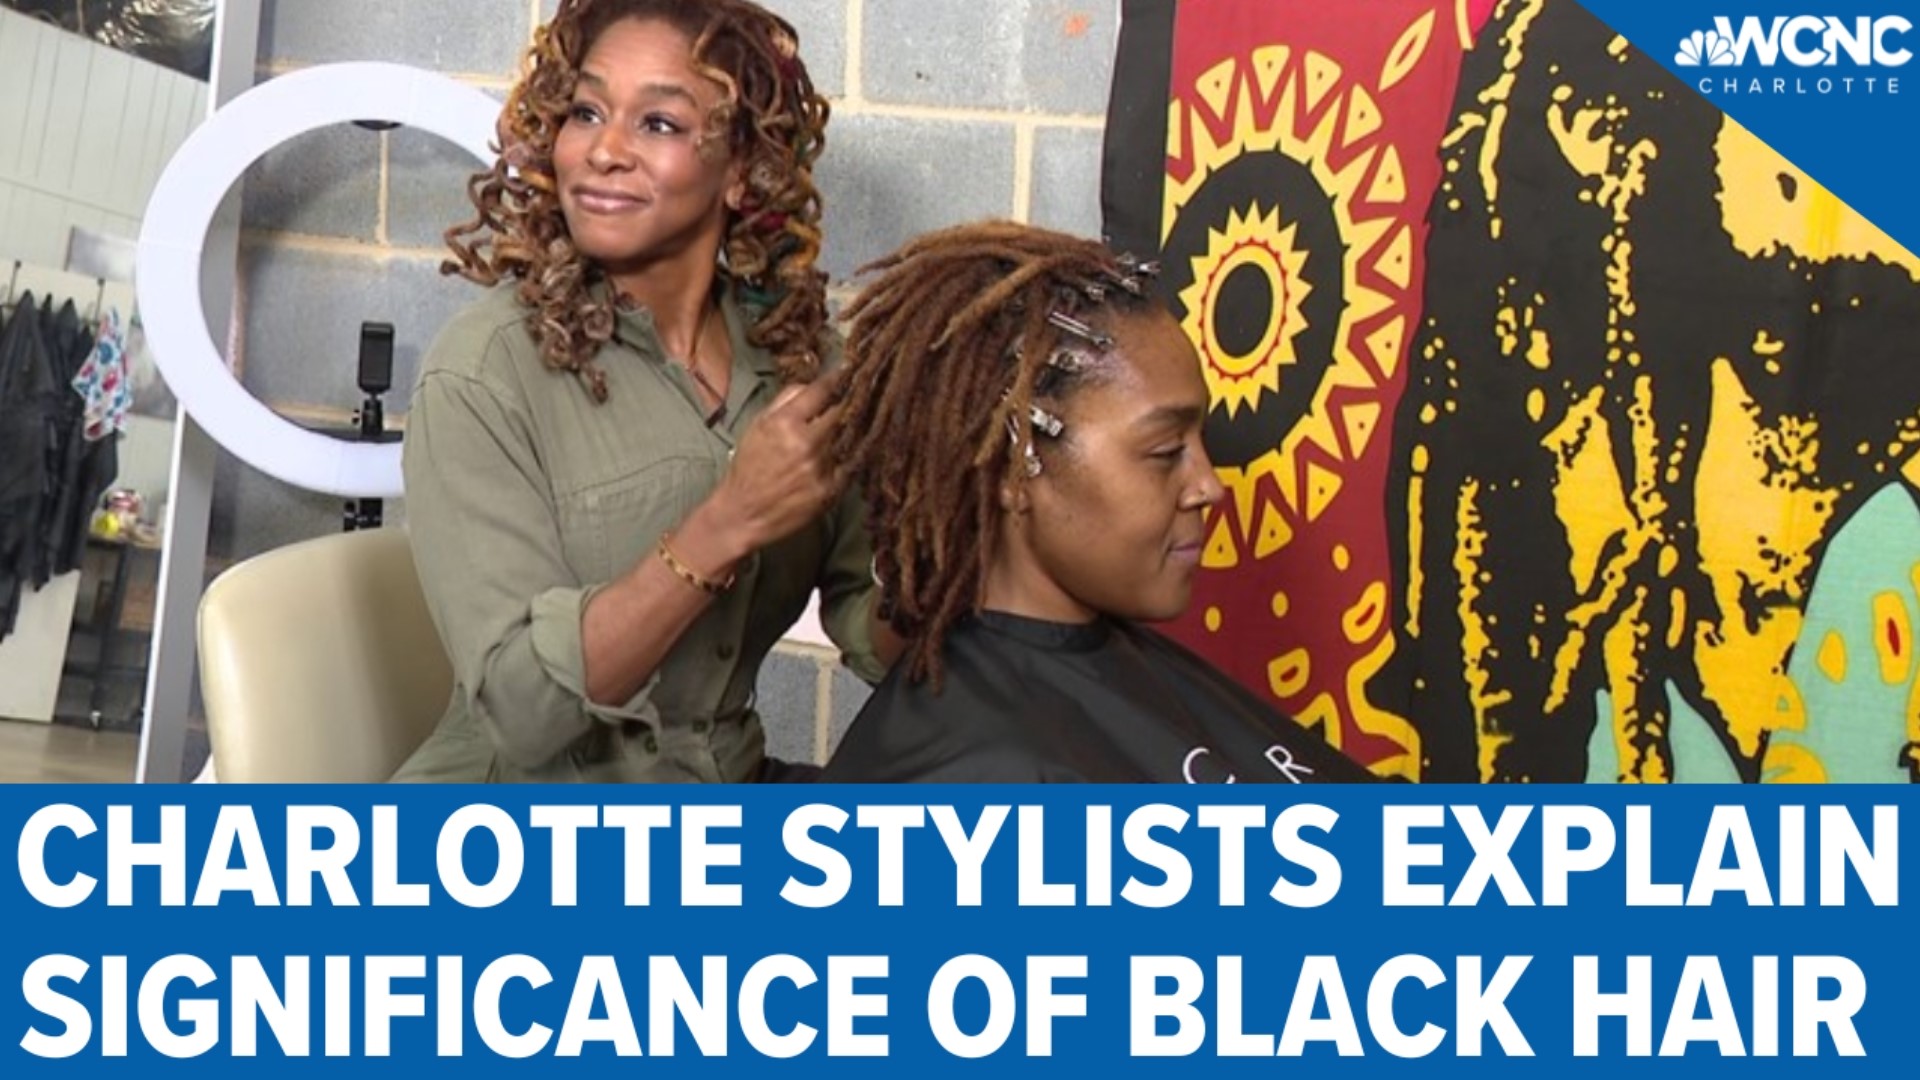 Natural styles are impacted by negative stereotypes and discrimination.